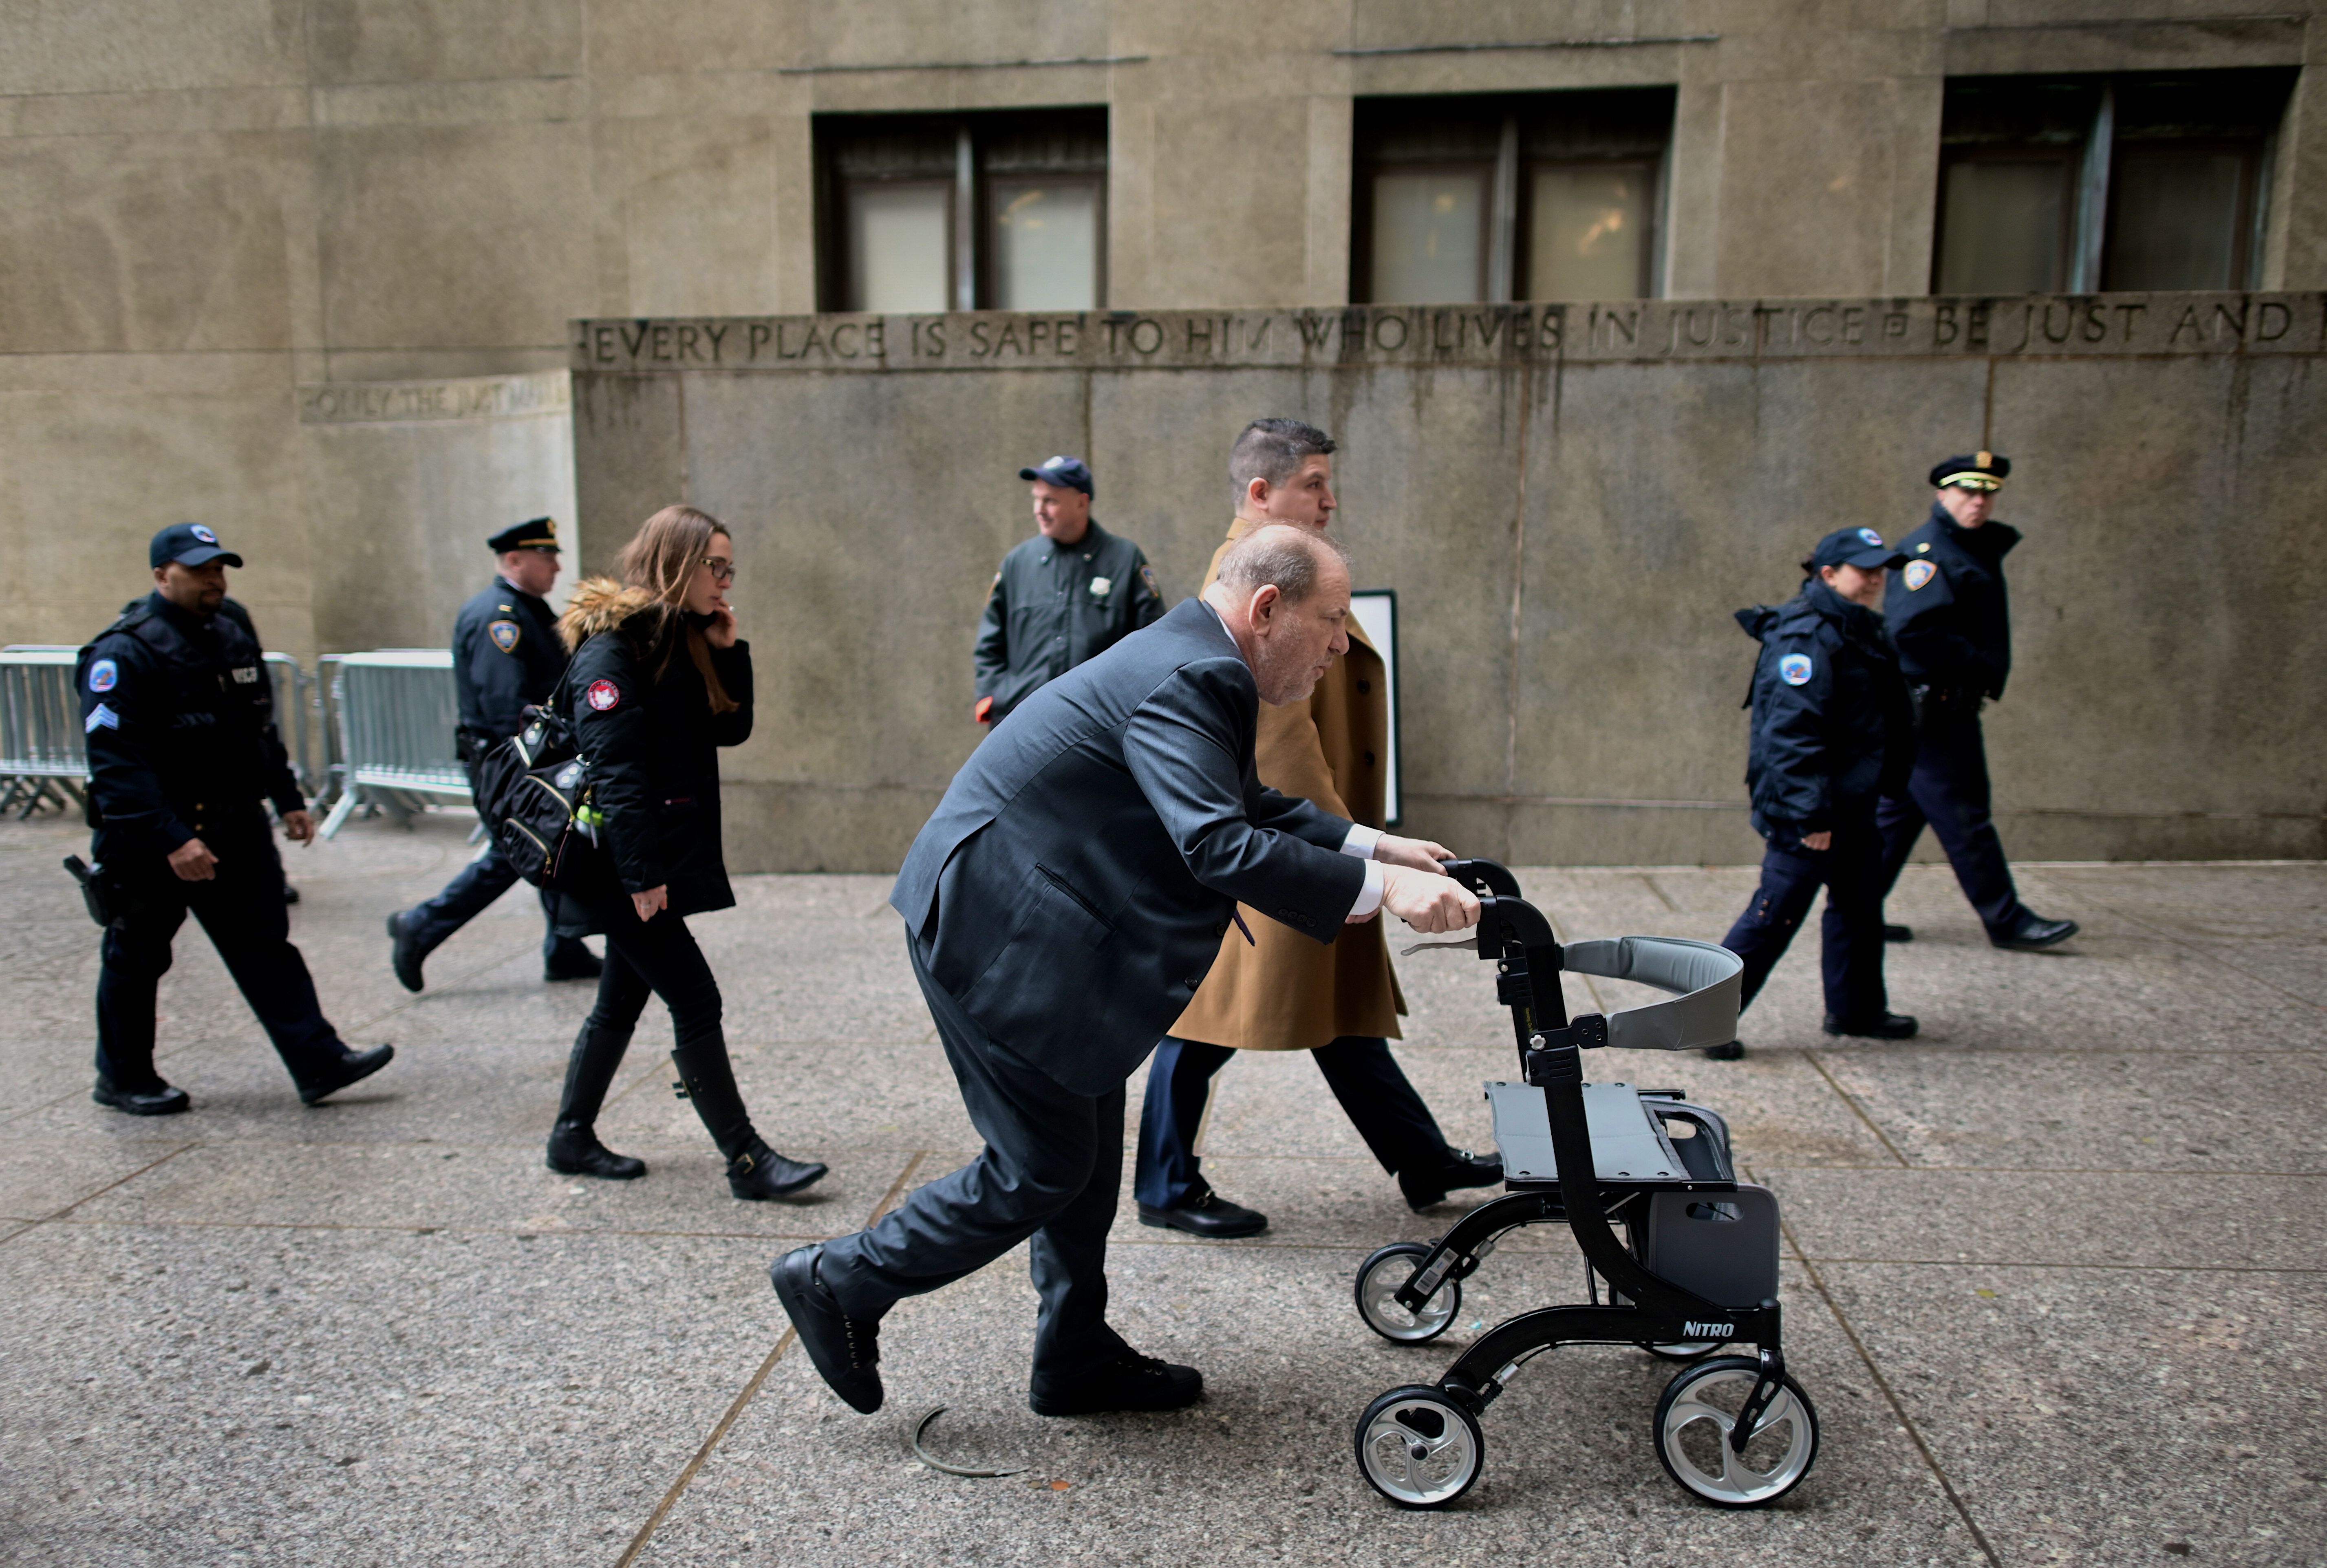 Harvey Weinstein arrives at the Manhattan Criminal Court, on February 10, 2020 in New York City. - Since testimony began on January 22,2020 six women have taken the stand to say they were sexually assaulted by Weinstein. All of the allegations against the former Hollywood titan are at least six years old, while one of them dates back three decades.Weinstein, 67, faces life imprisonment if convicted of predatory sexual assault charges related to ex-actress Jessica Mann and former production assistant Mimi Haleyi. (Photo by JOHANNES EISELE/AFP via Getty Images)